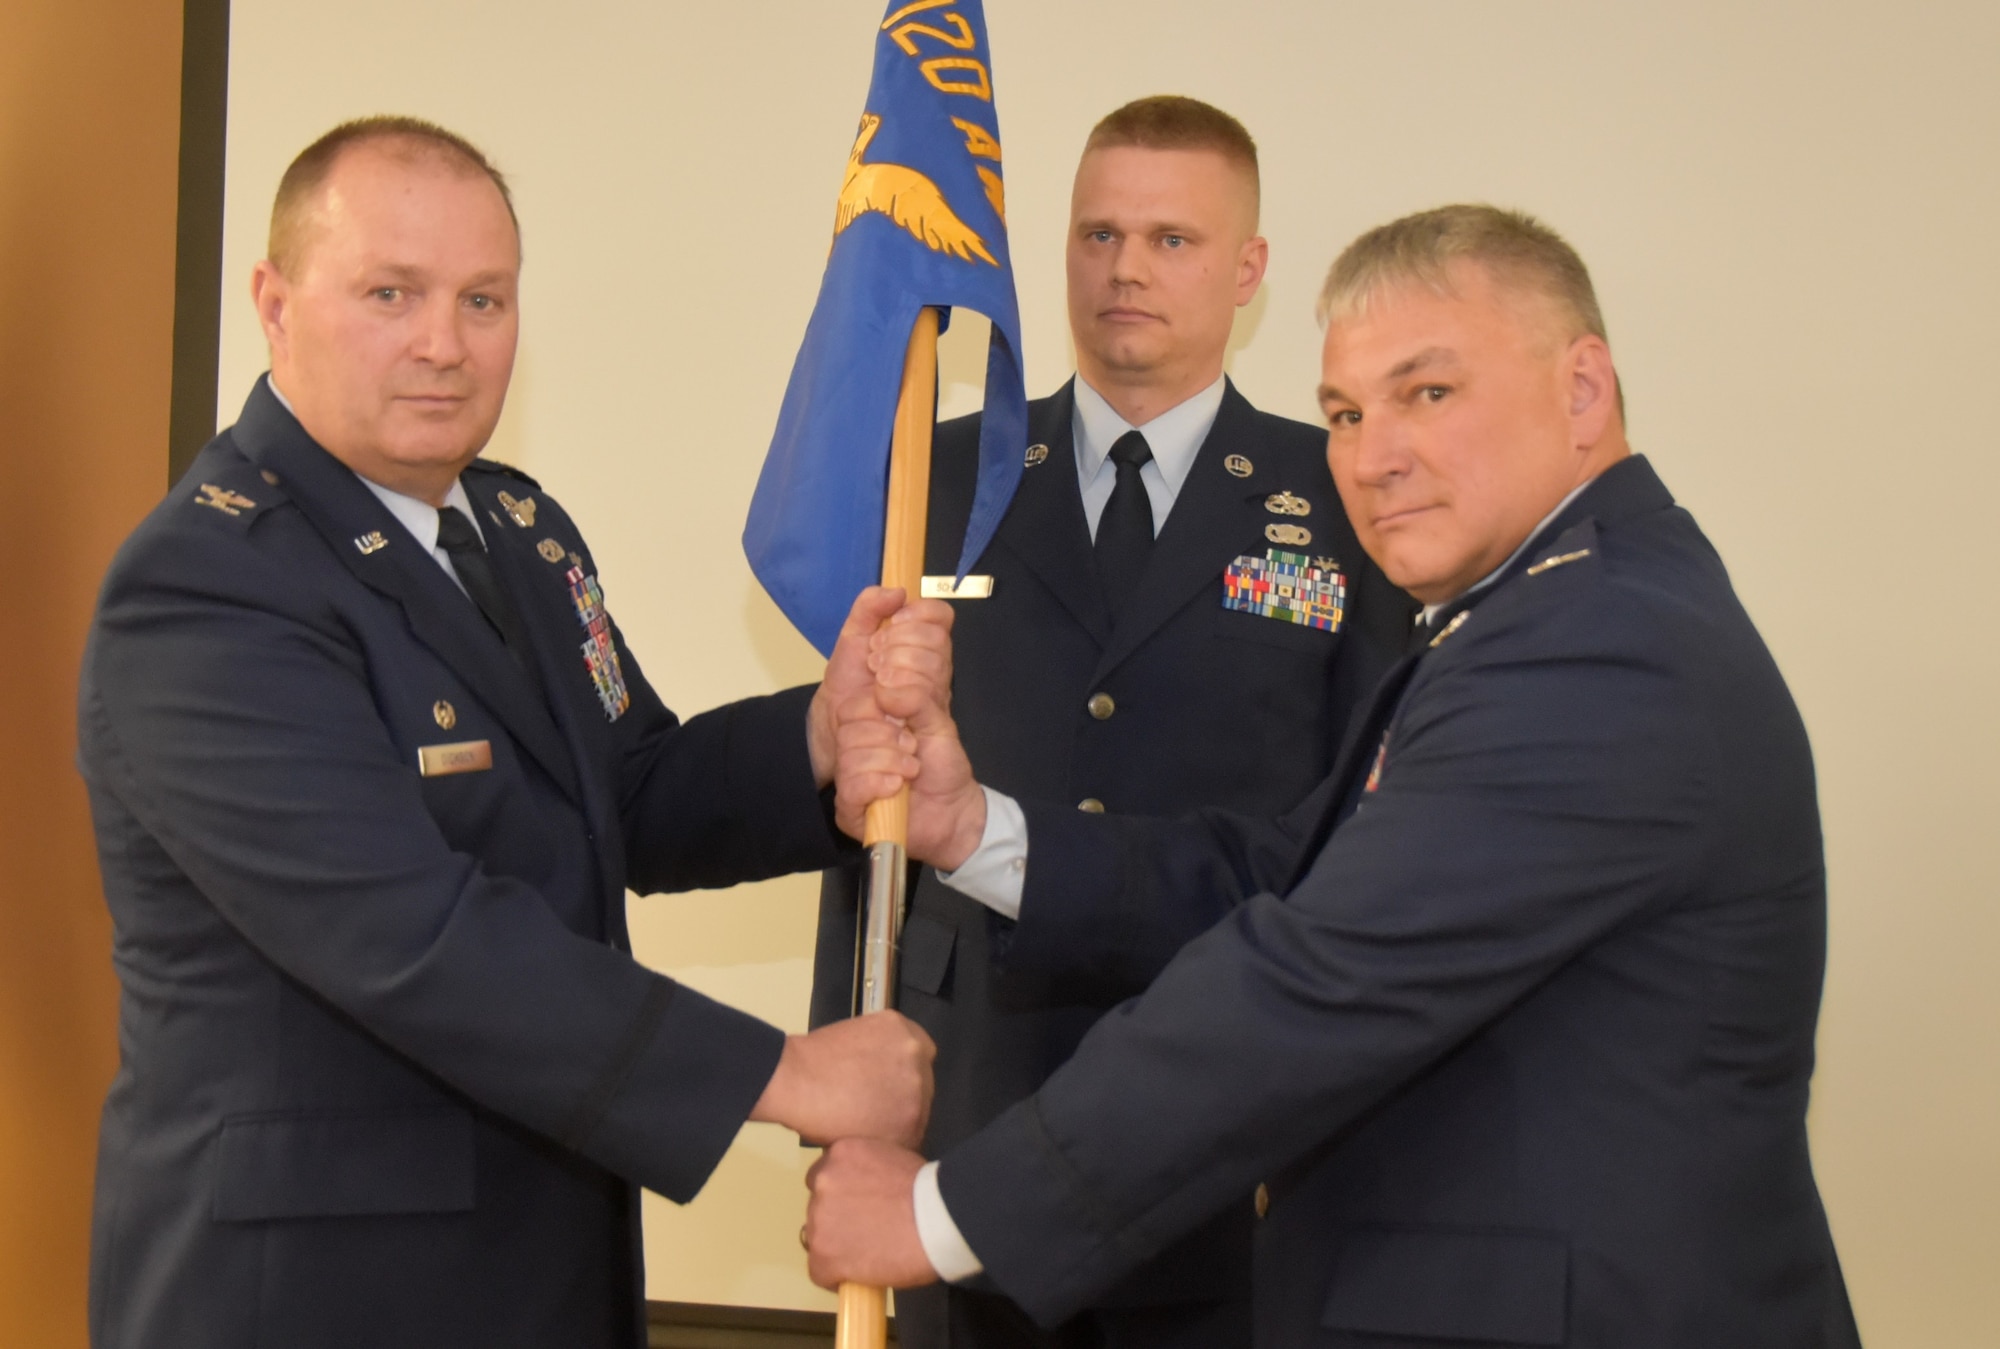 Col. Trace Thomas, right, accepts the 120th Maintenance Group guideon from Col. Buel Dickson, 120th Airlift Wing commander, Montana Air National Guard, during a change of command ceremony April 6, 2019, Great Falls, Montana. The outgoing maintenance commander, Col. Larry Gardner, was selected as the next commander of the 141st Air Refueling Wing, Fairchild Air Force Base, Washington.